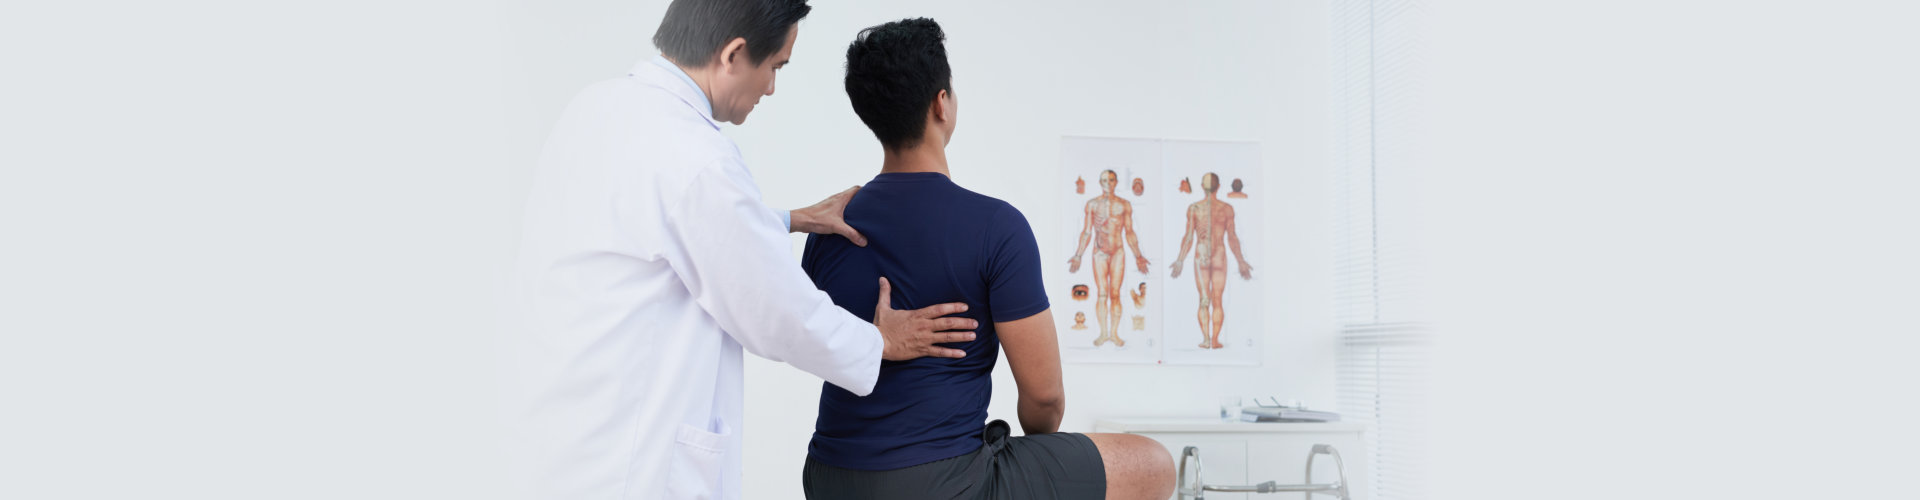 a patient being checked his back by the doctor